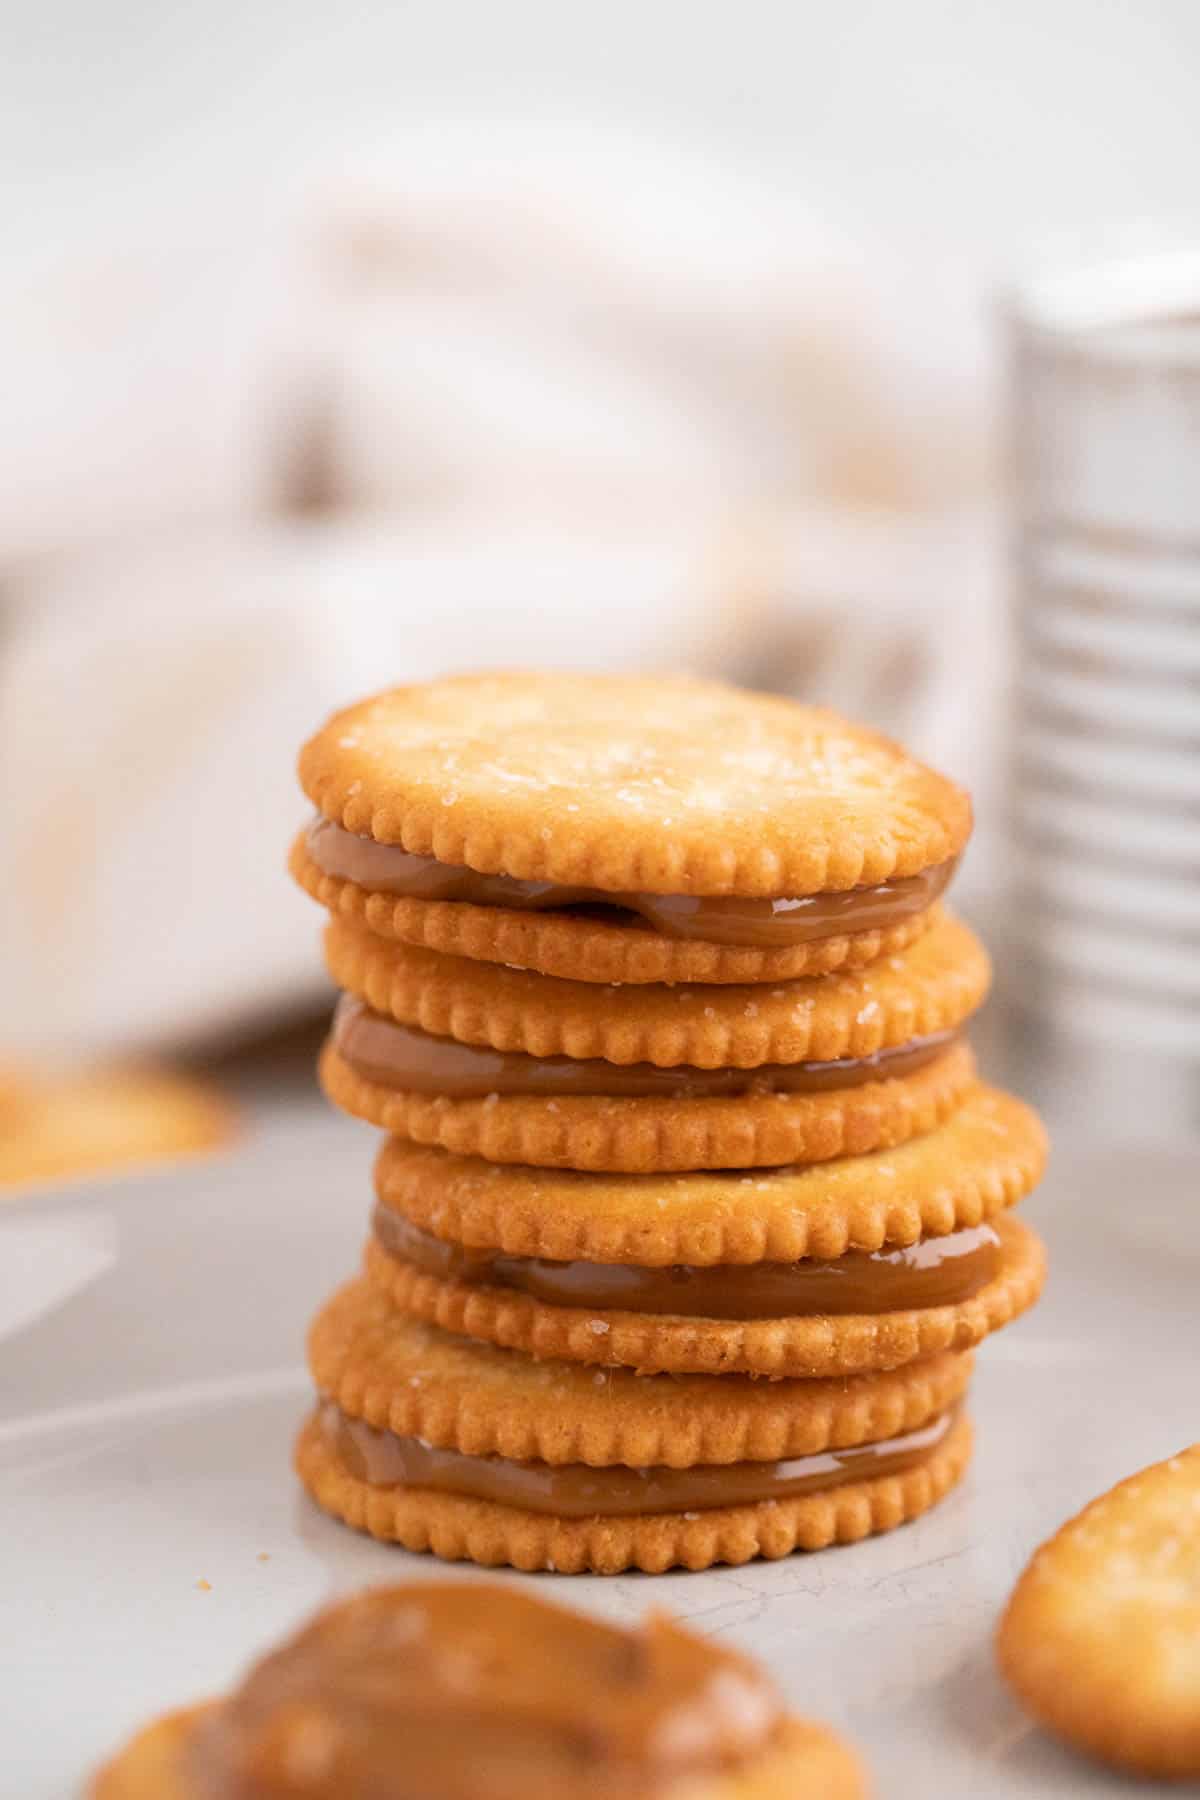 A stack of crackers sandwiched with dulce de leche.